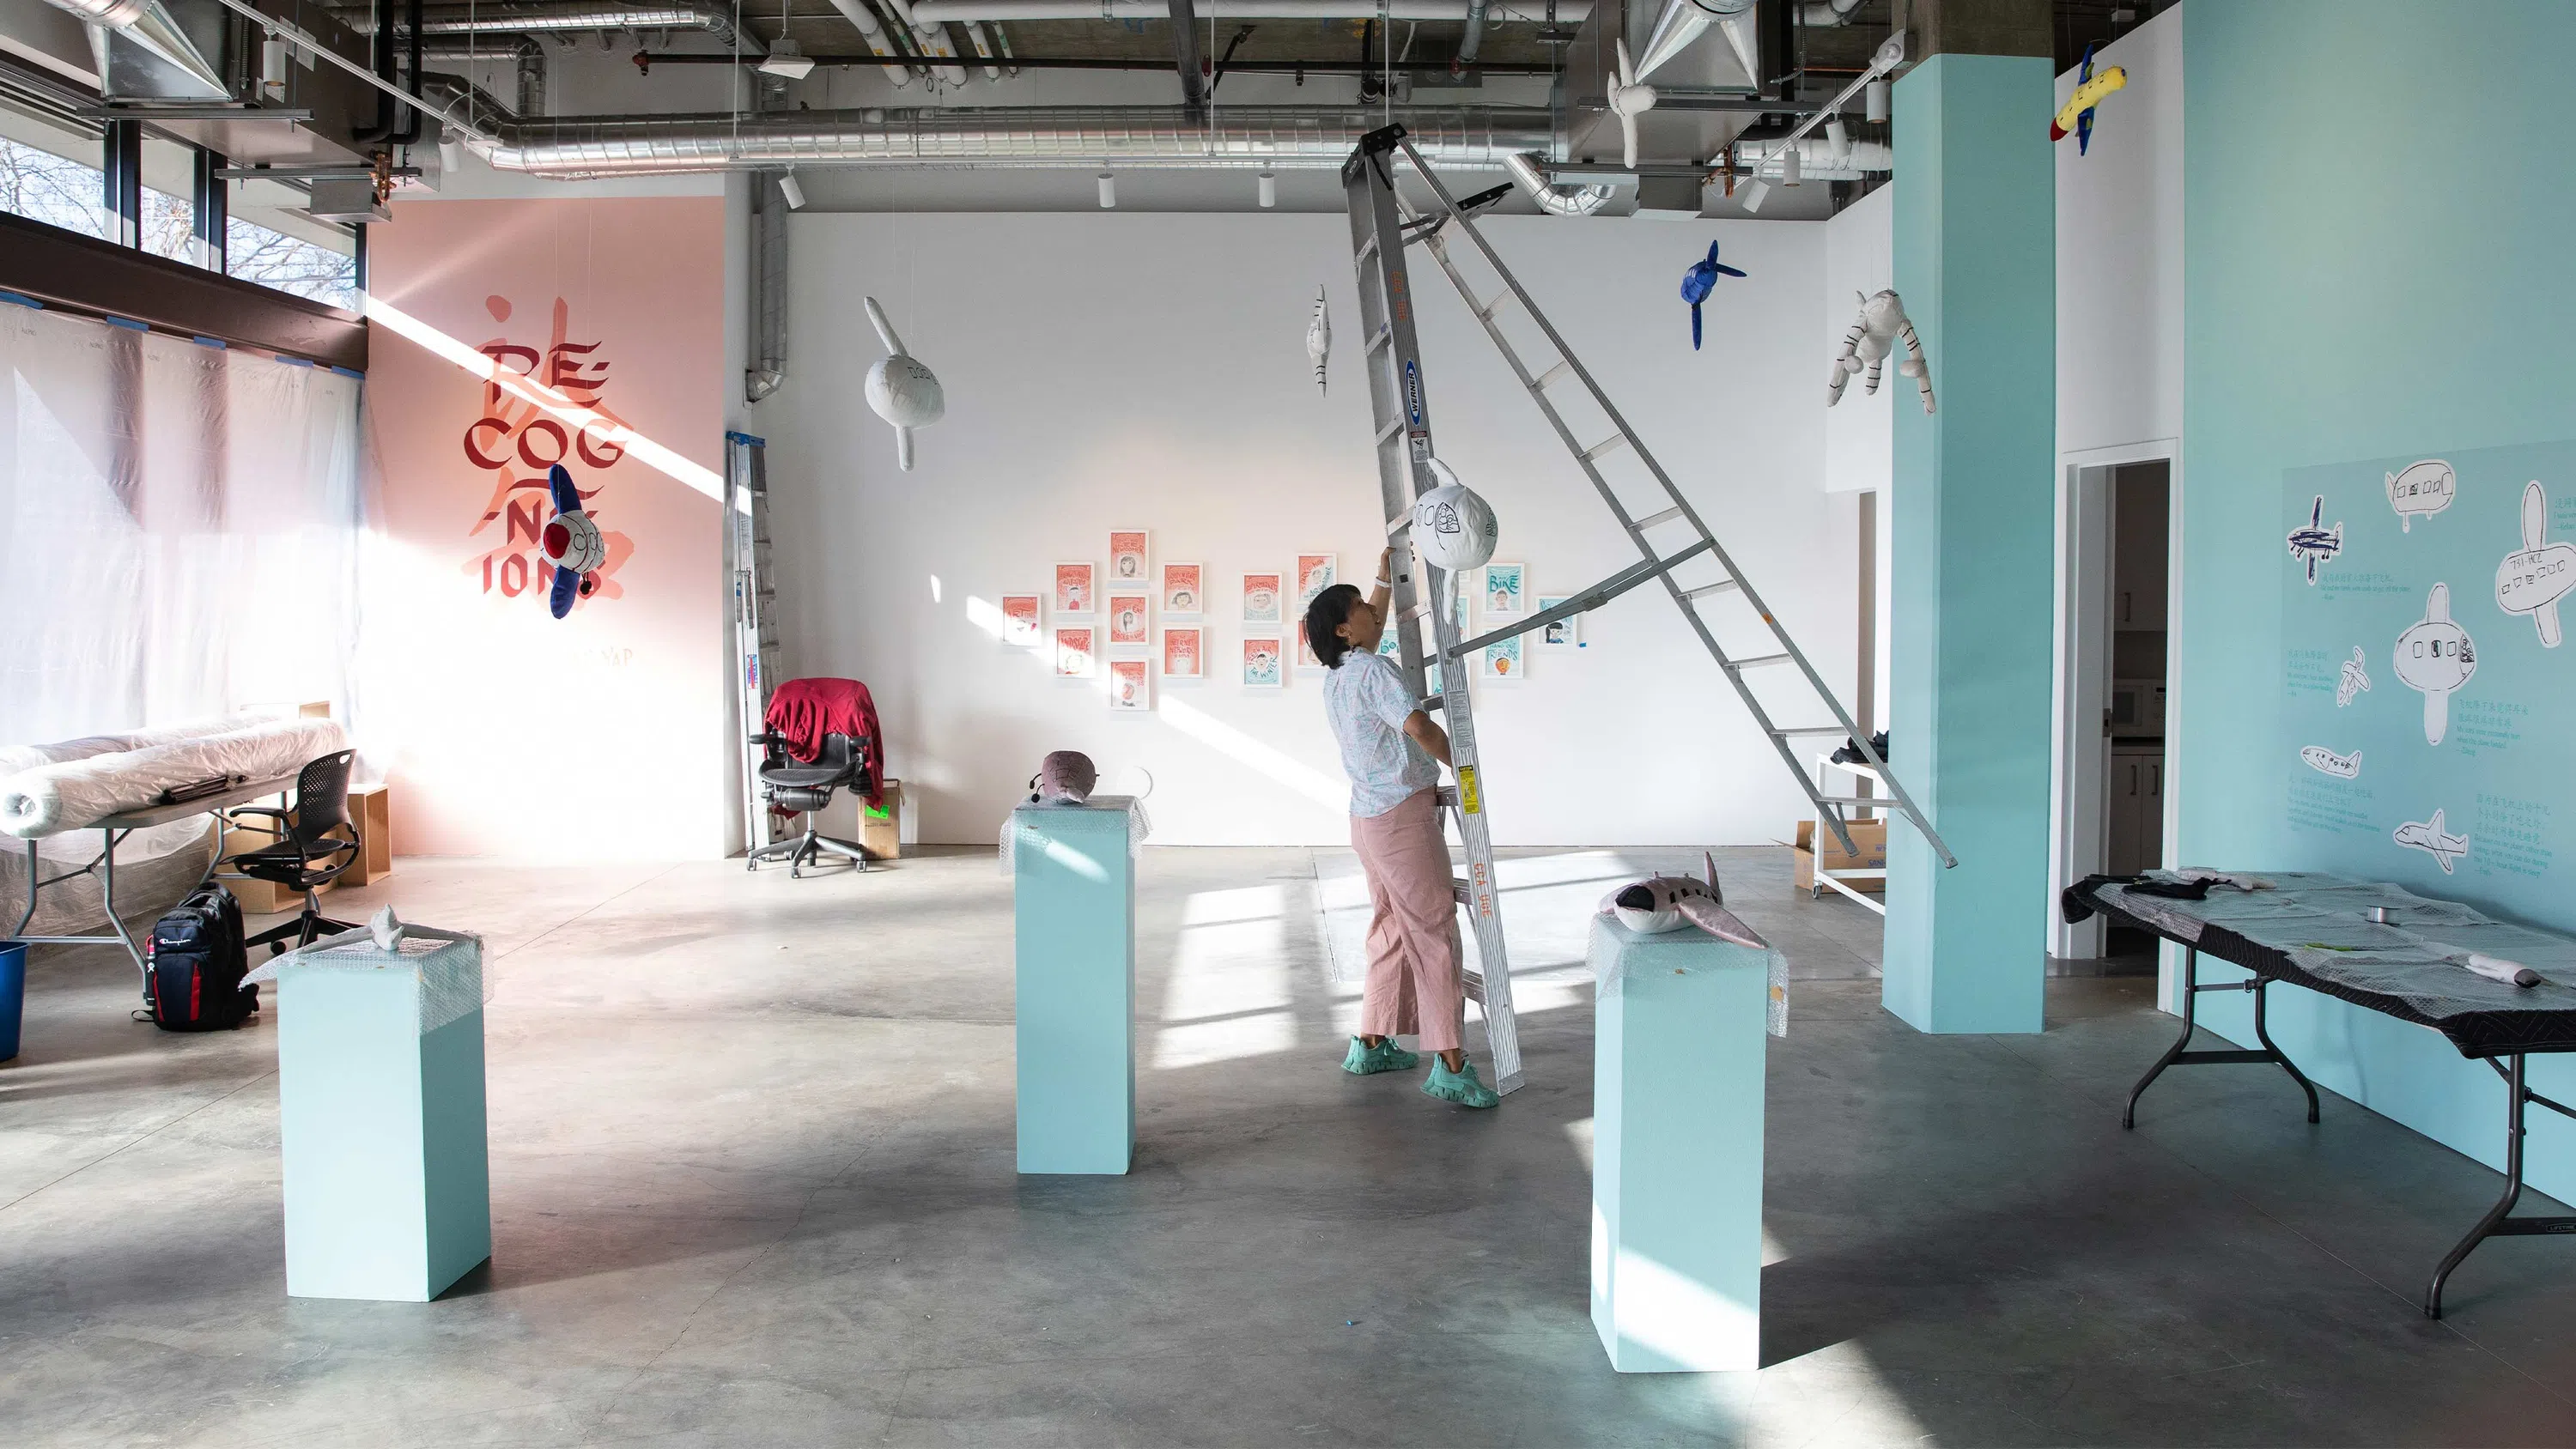 Artist Christine Wong Yap adjusts a ladder while installing her exhibition in the CCA Campus Gallery.